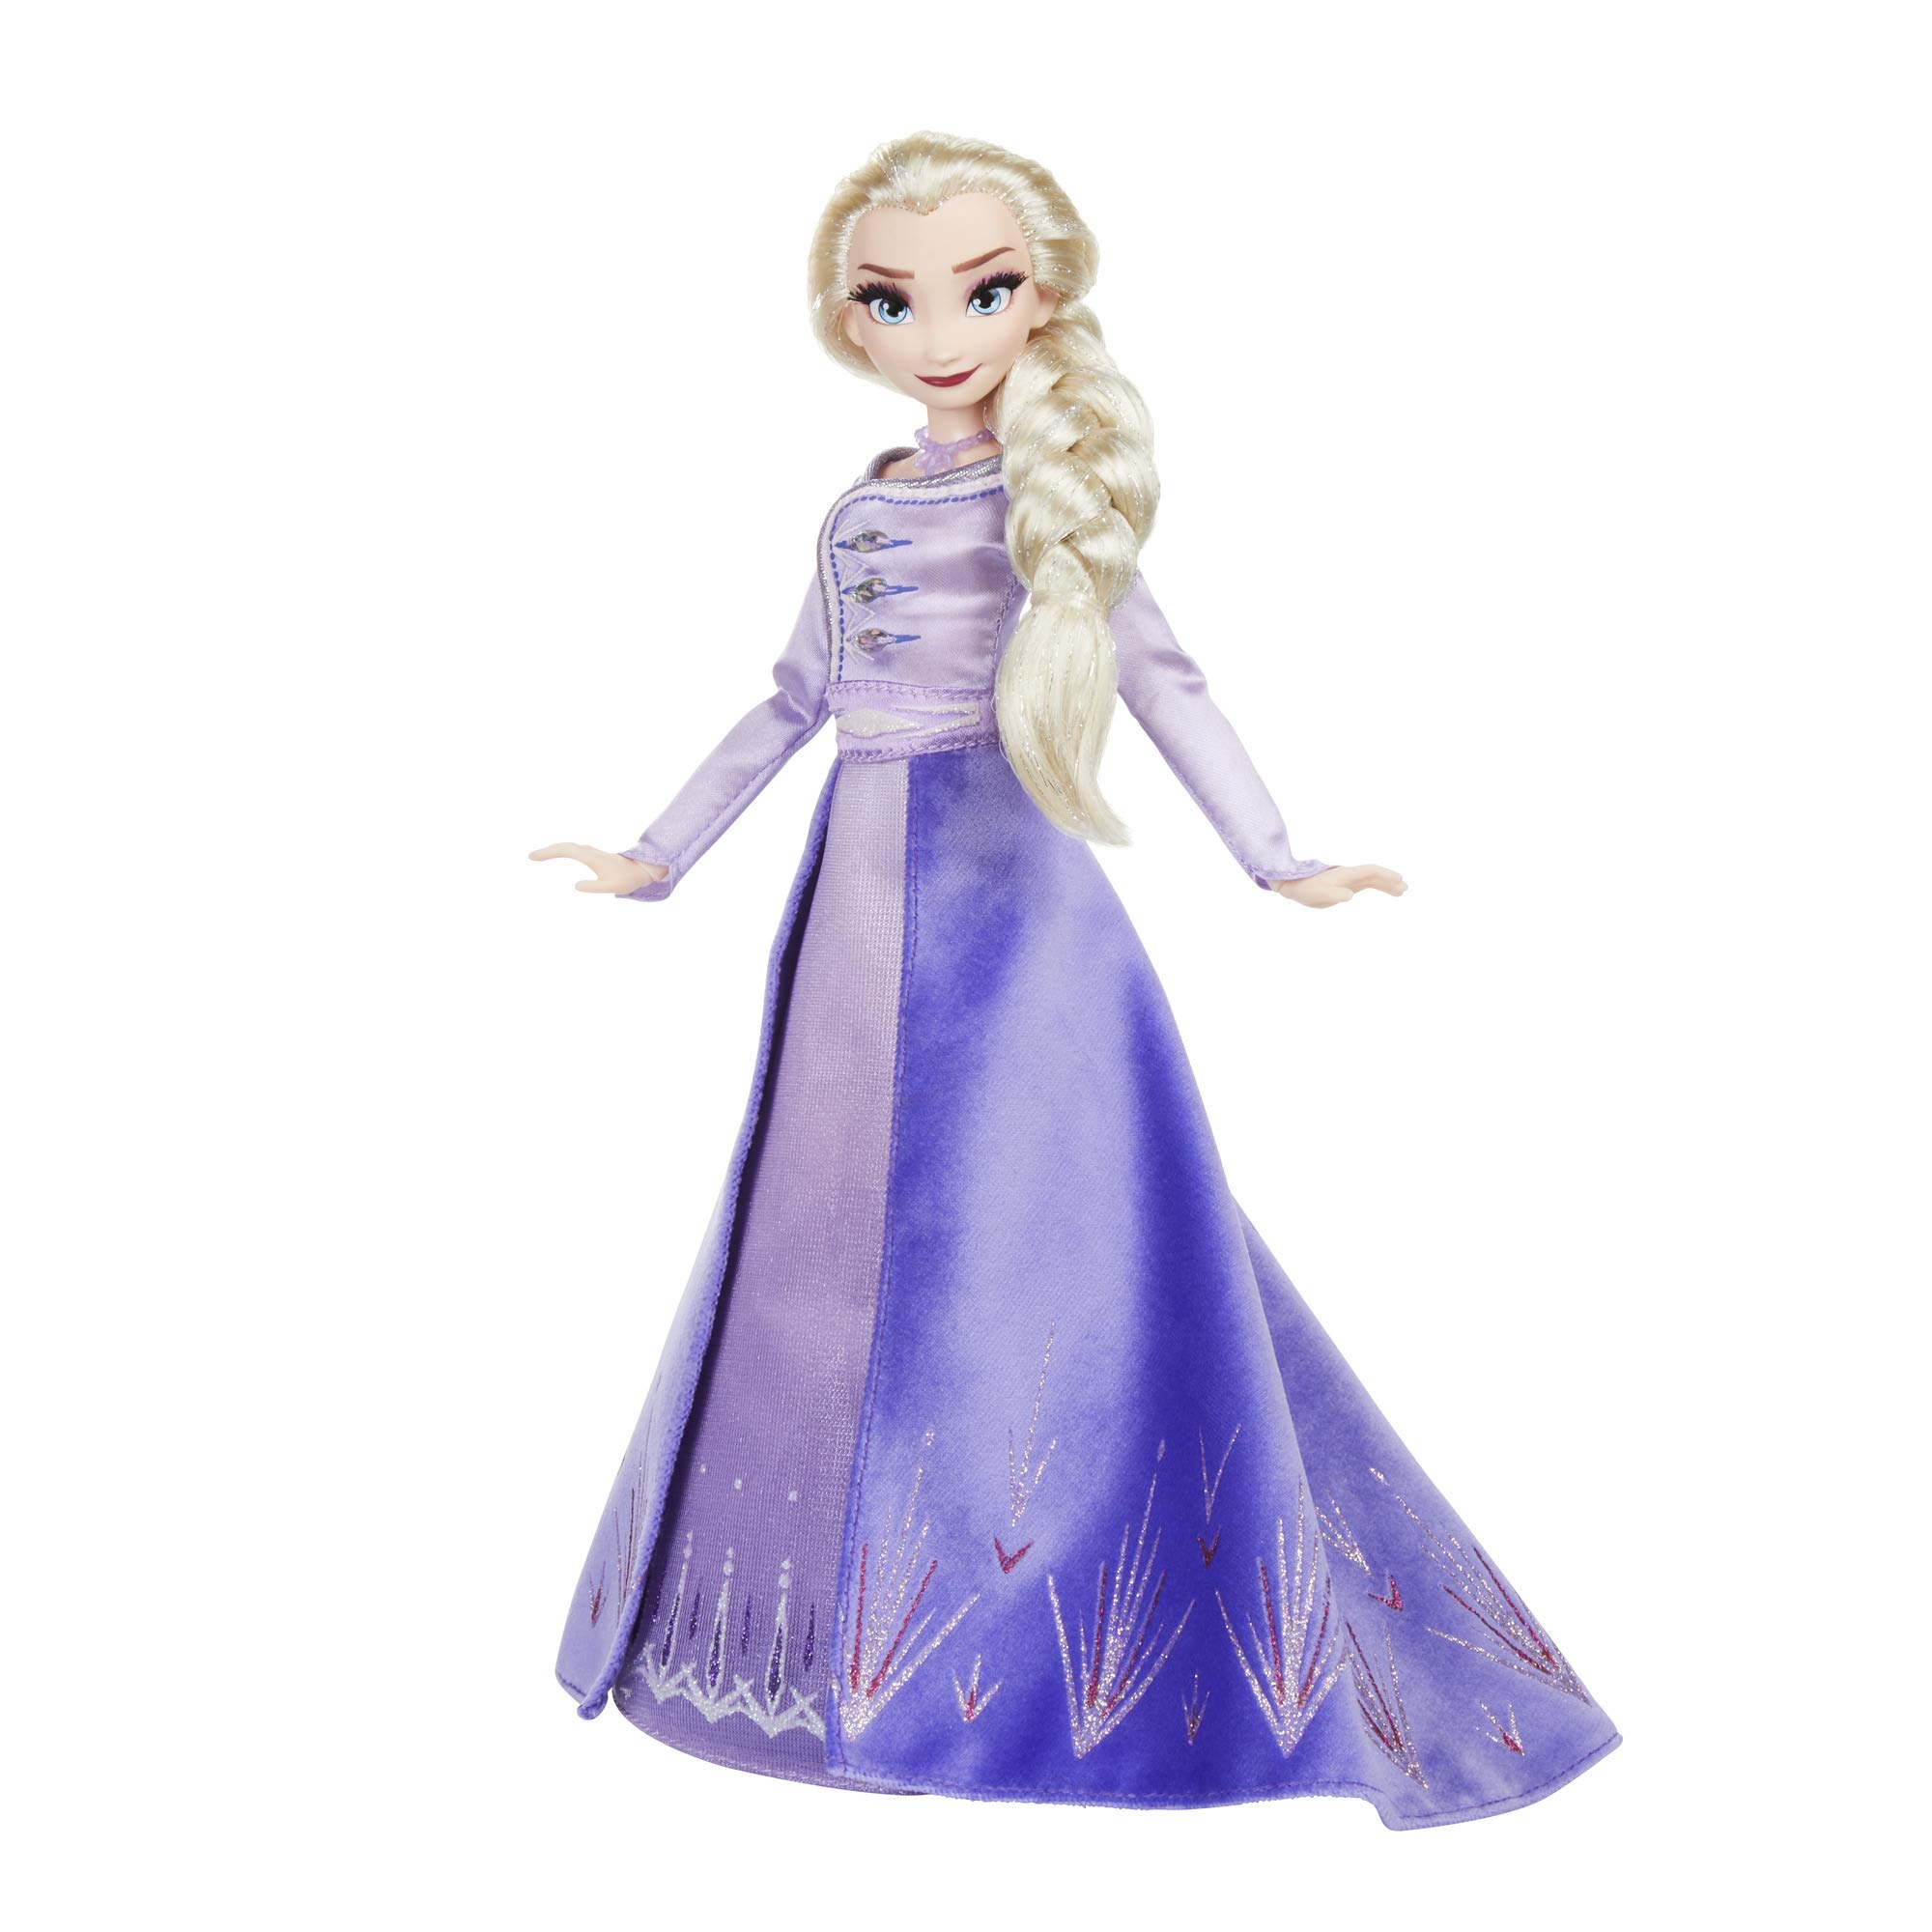 Disney Frozen Frozen Disney Elsa, Anna, & Olaf Deluxe Fashion Doll Collection Pack Set with Premium Dresses, Shoes and Accessories Inspired 2 (Amazon Exclusive)